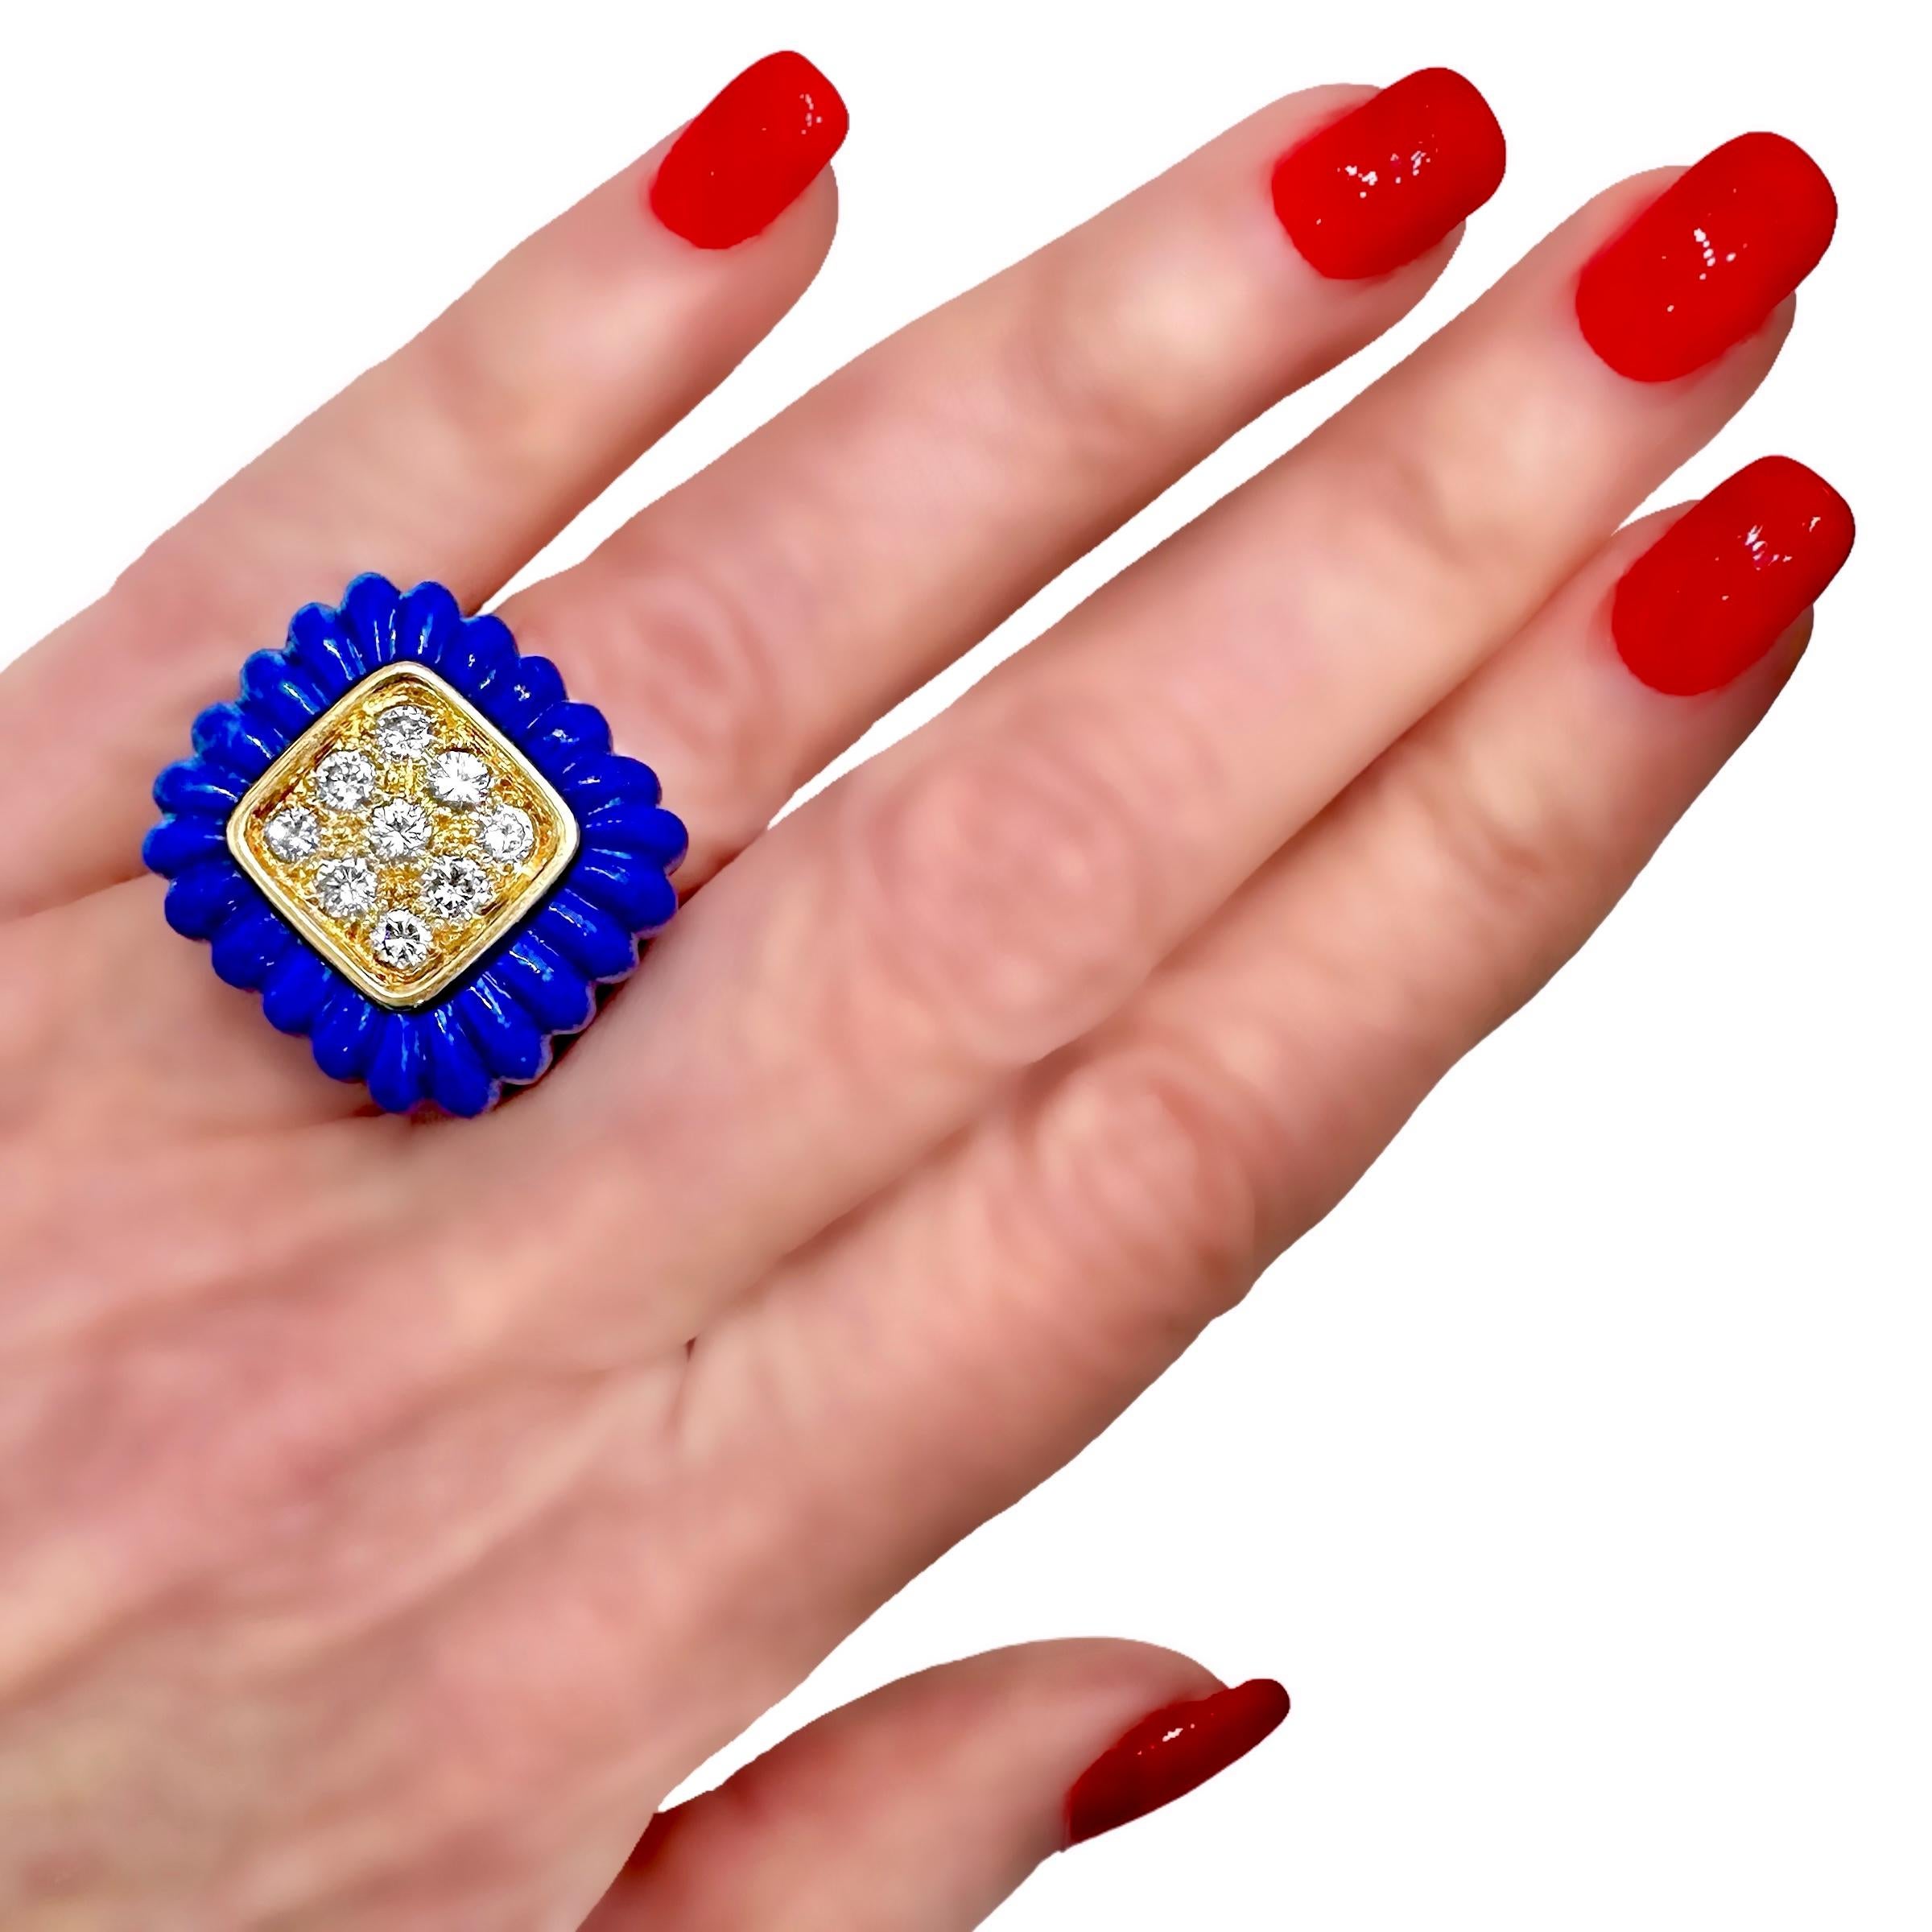 1970's 18K Yellow Gold, Diamond & Vivid Blue, Fluted, Lapis-Lazuli Cocktail Ring For Sale 4